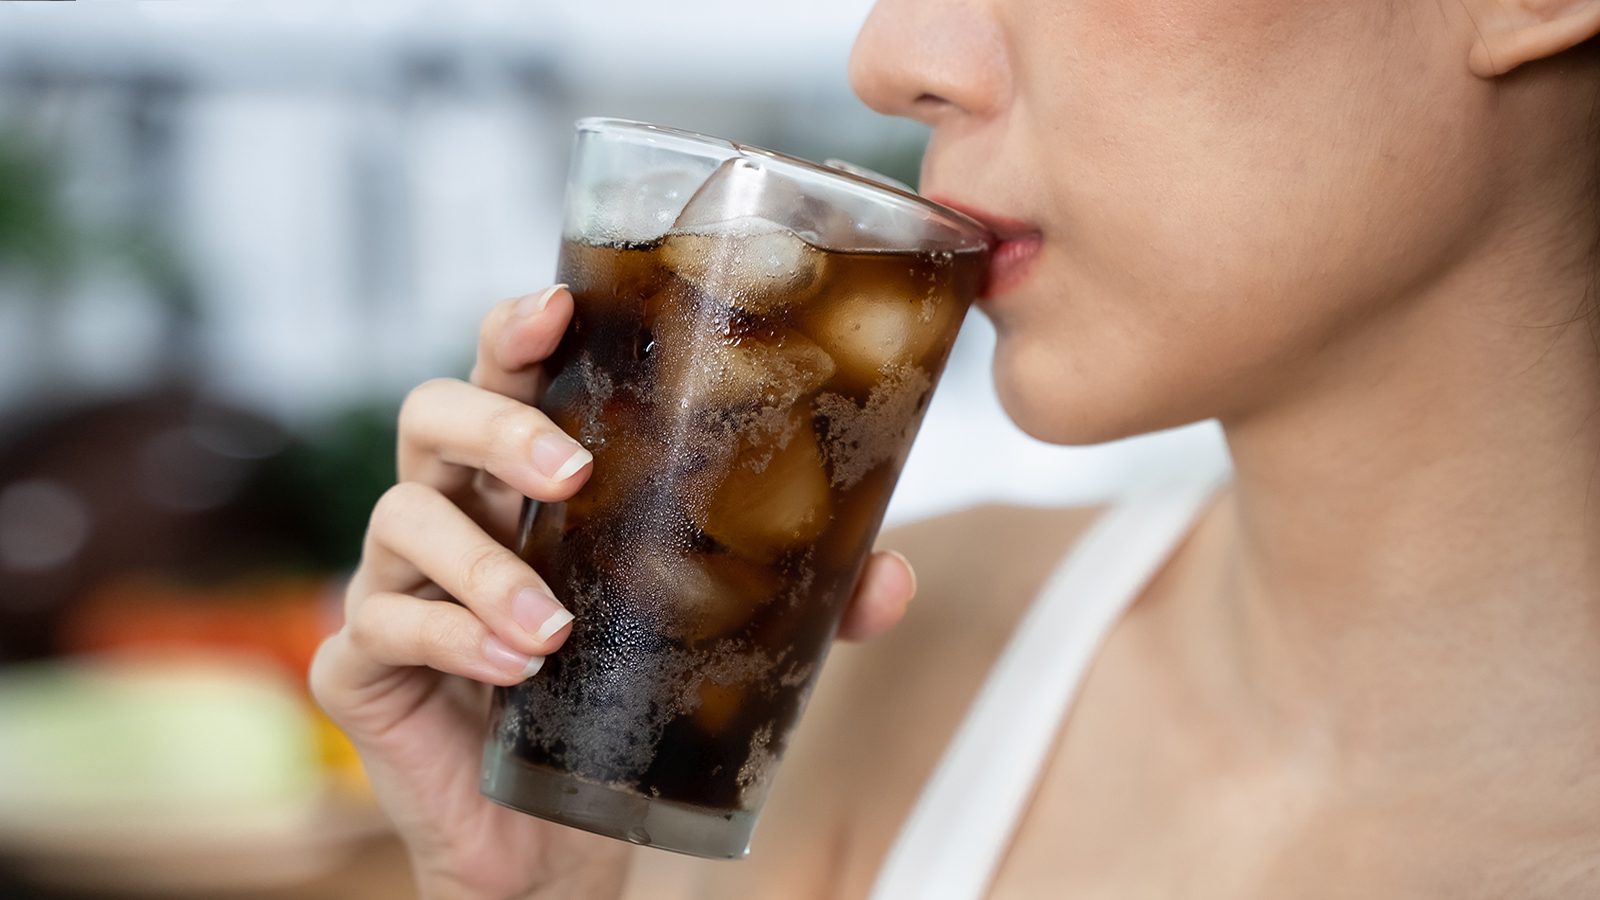 Researchers Connect Drinking Cola to Cognitive Decline